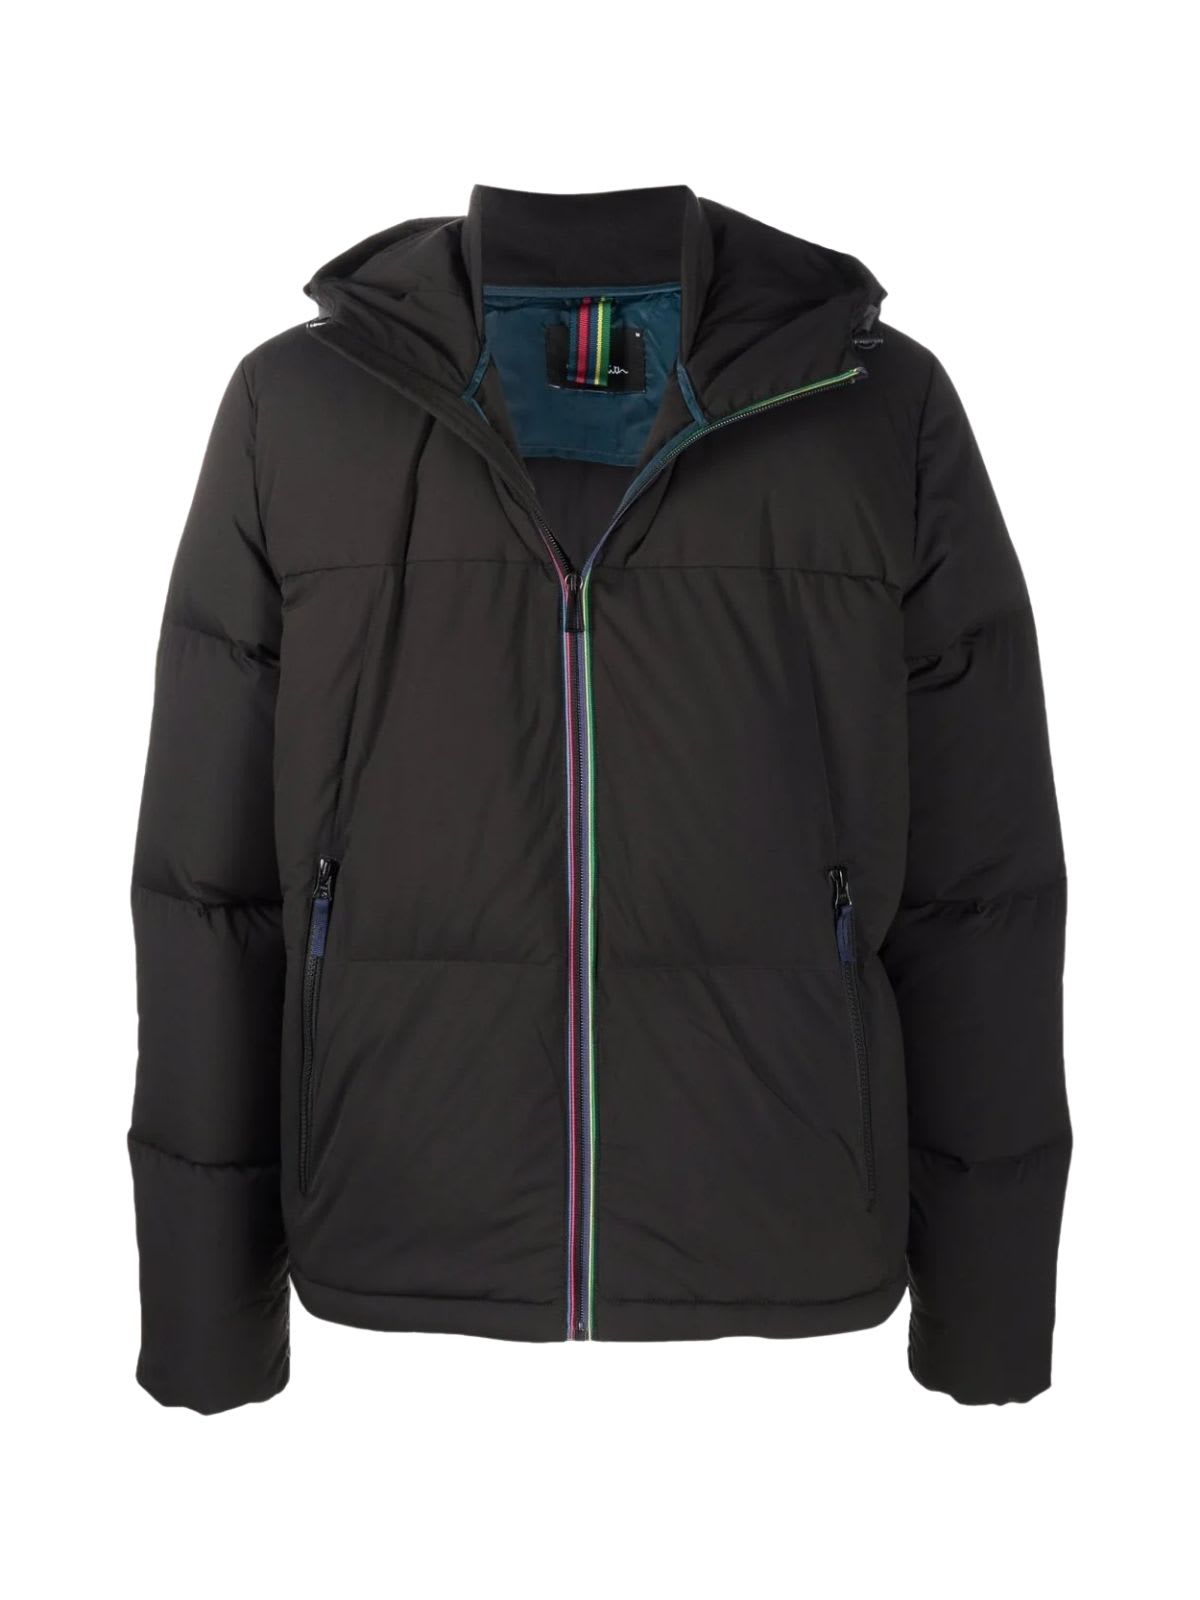 PS by Paul Smith Mens Hooded Down Jacket